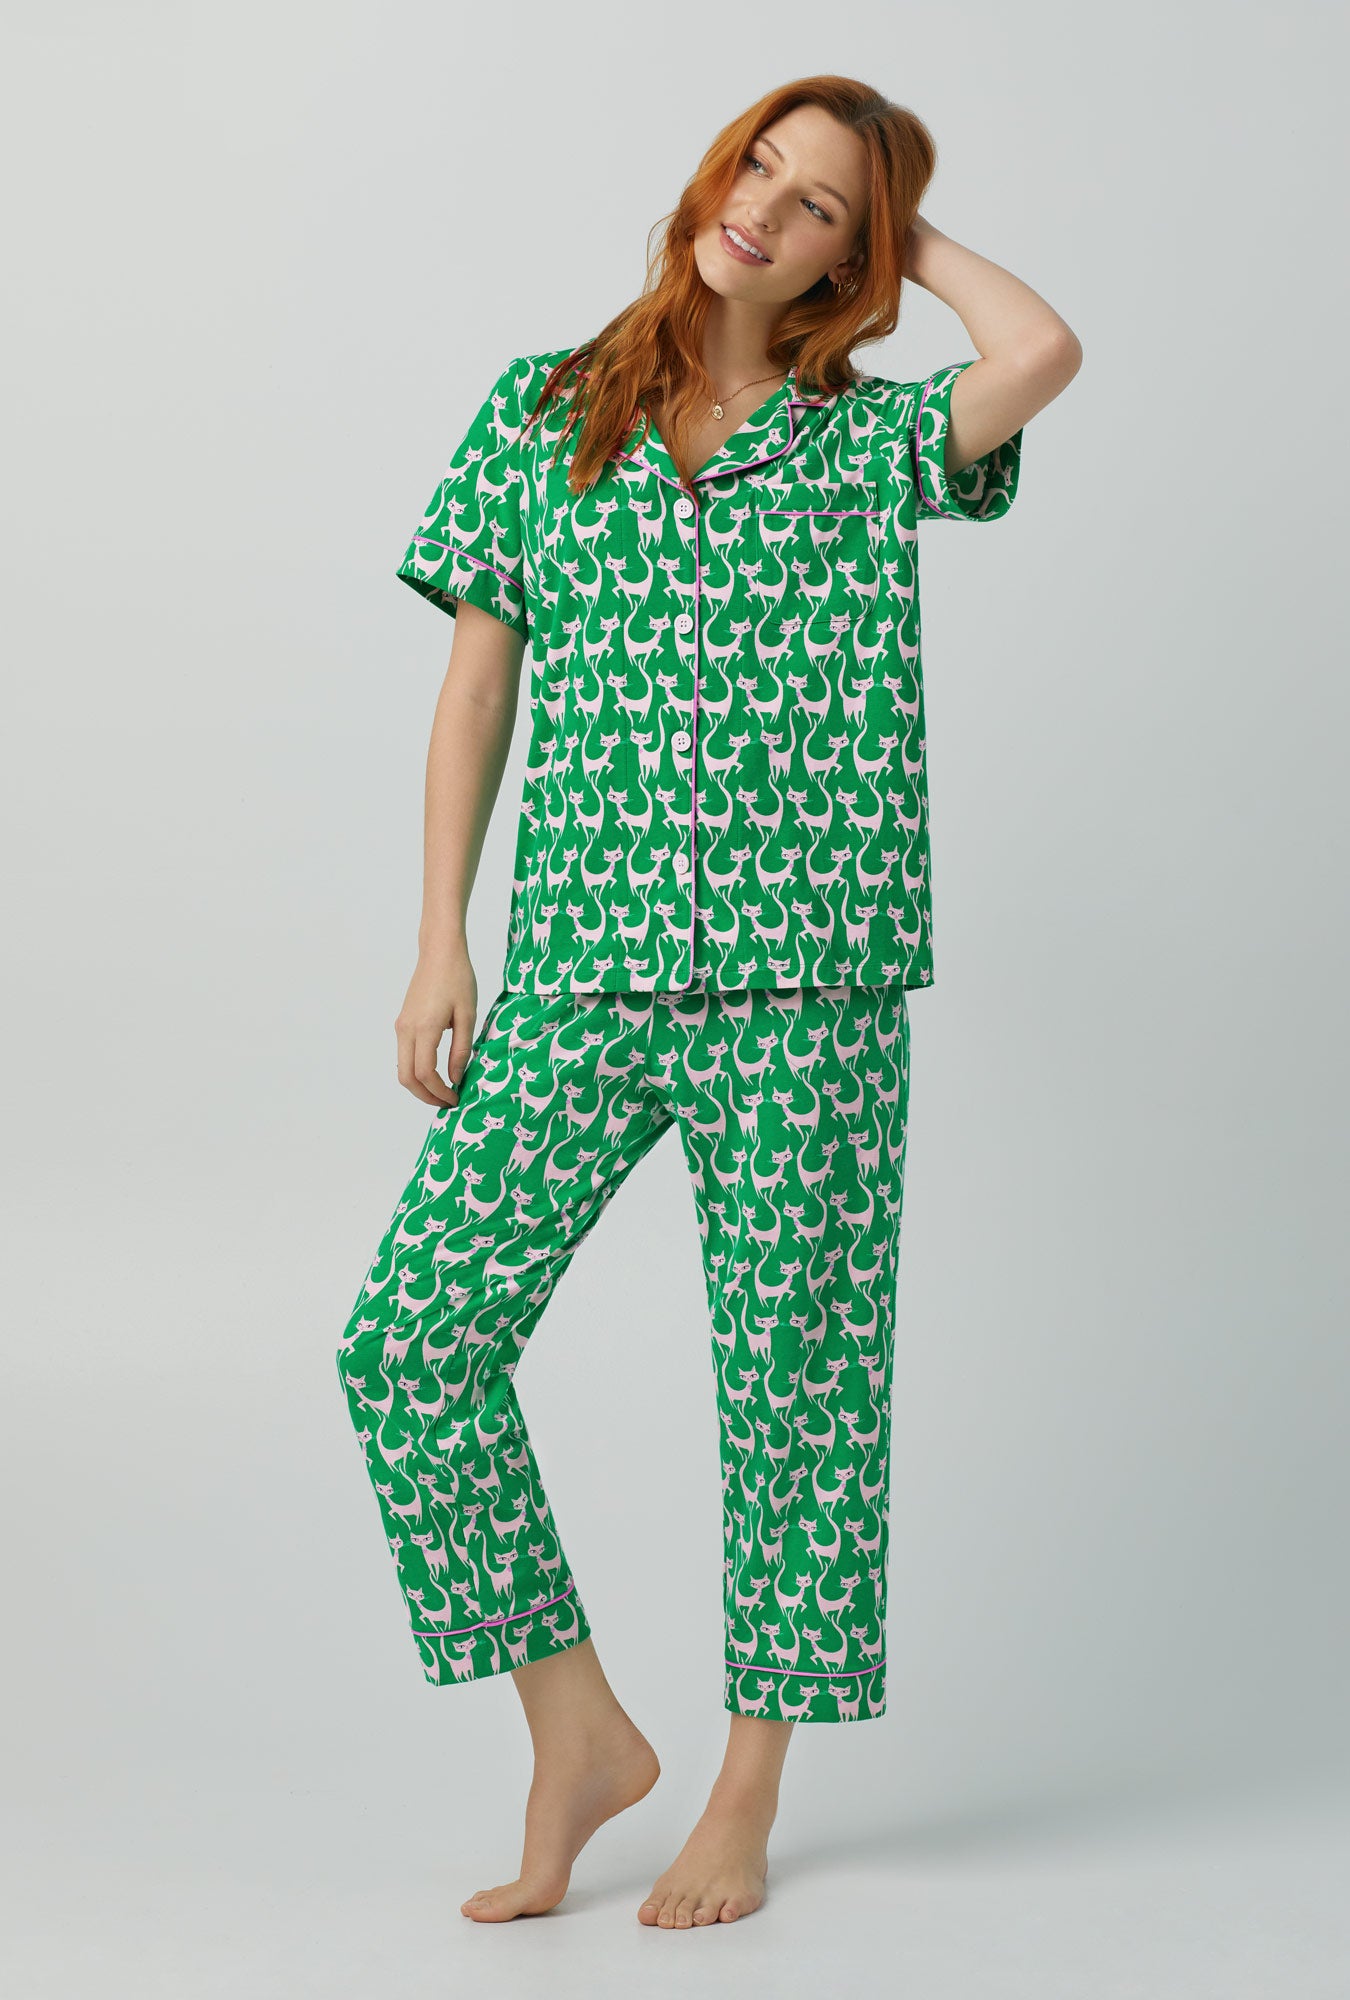 A lady wearing green Short Sleeve Classic Stretch Jersey Cropped with Cool Cats  print